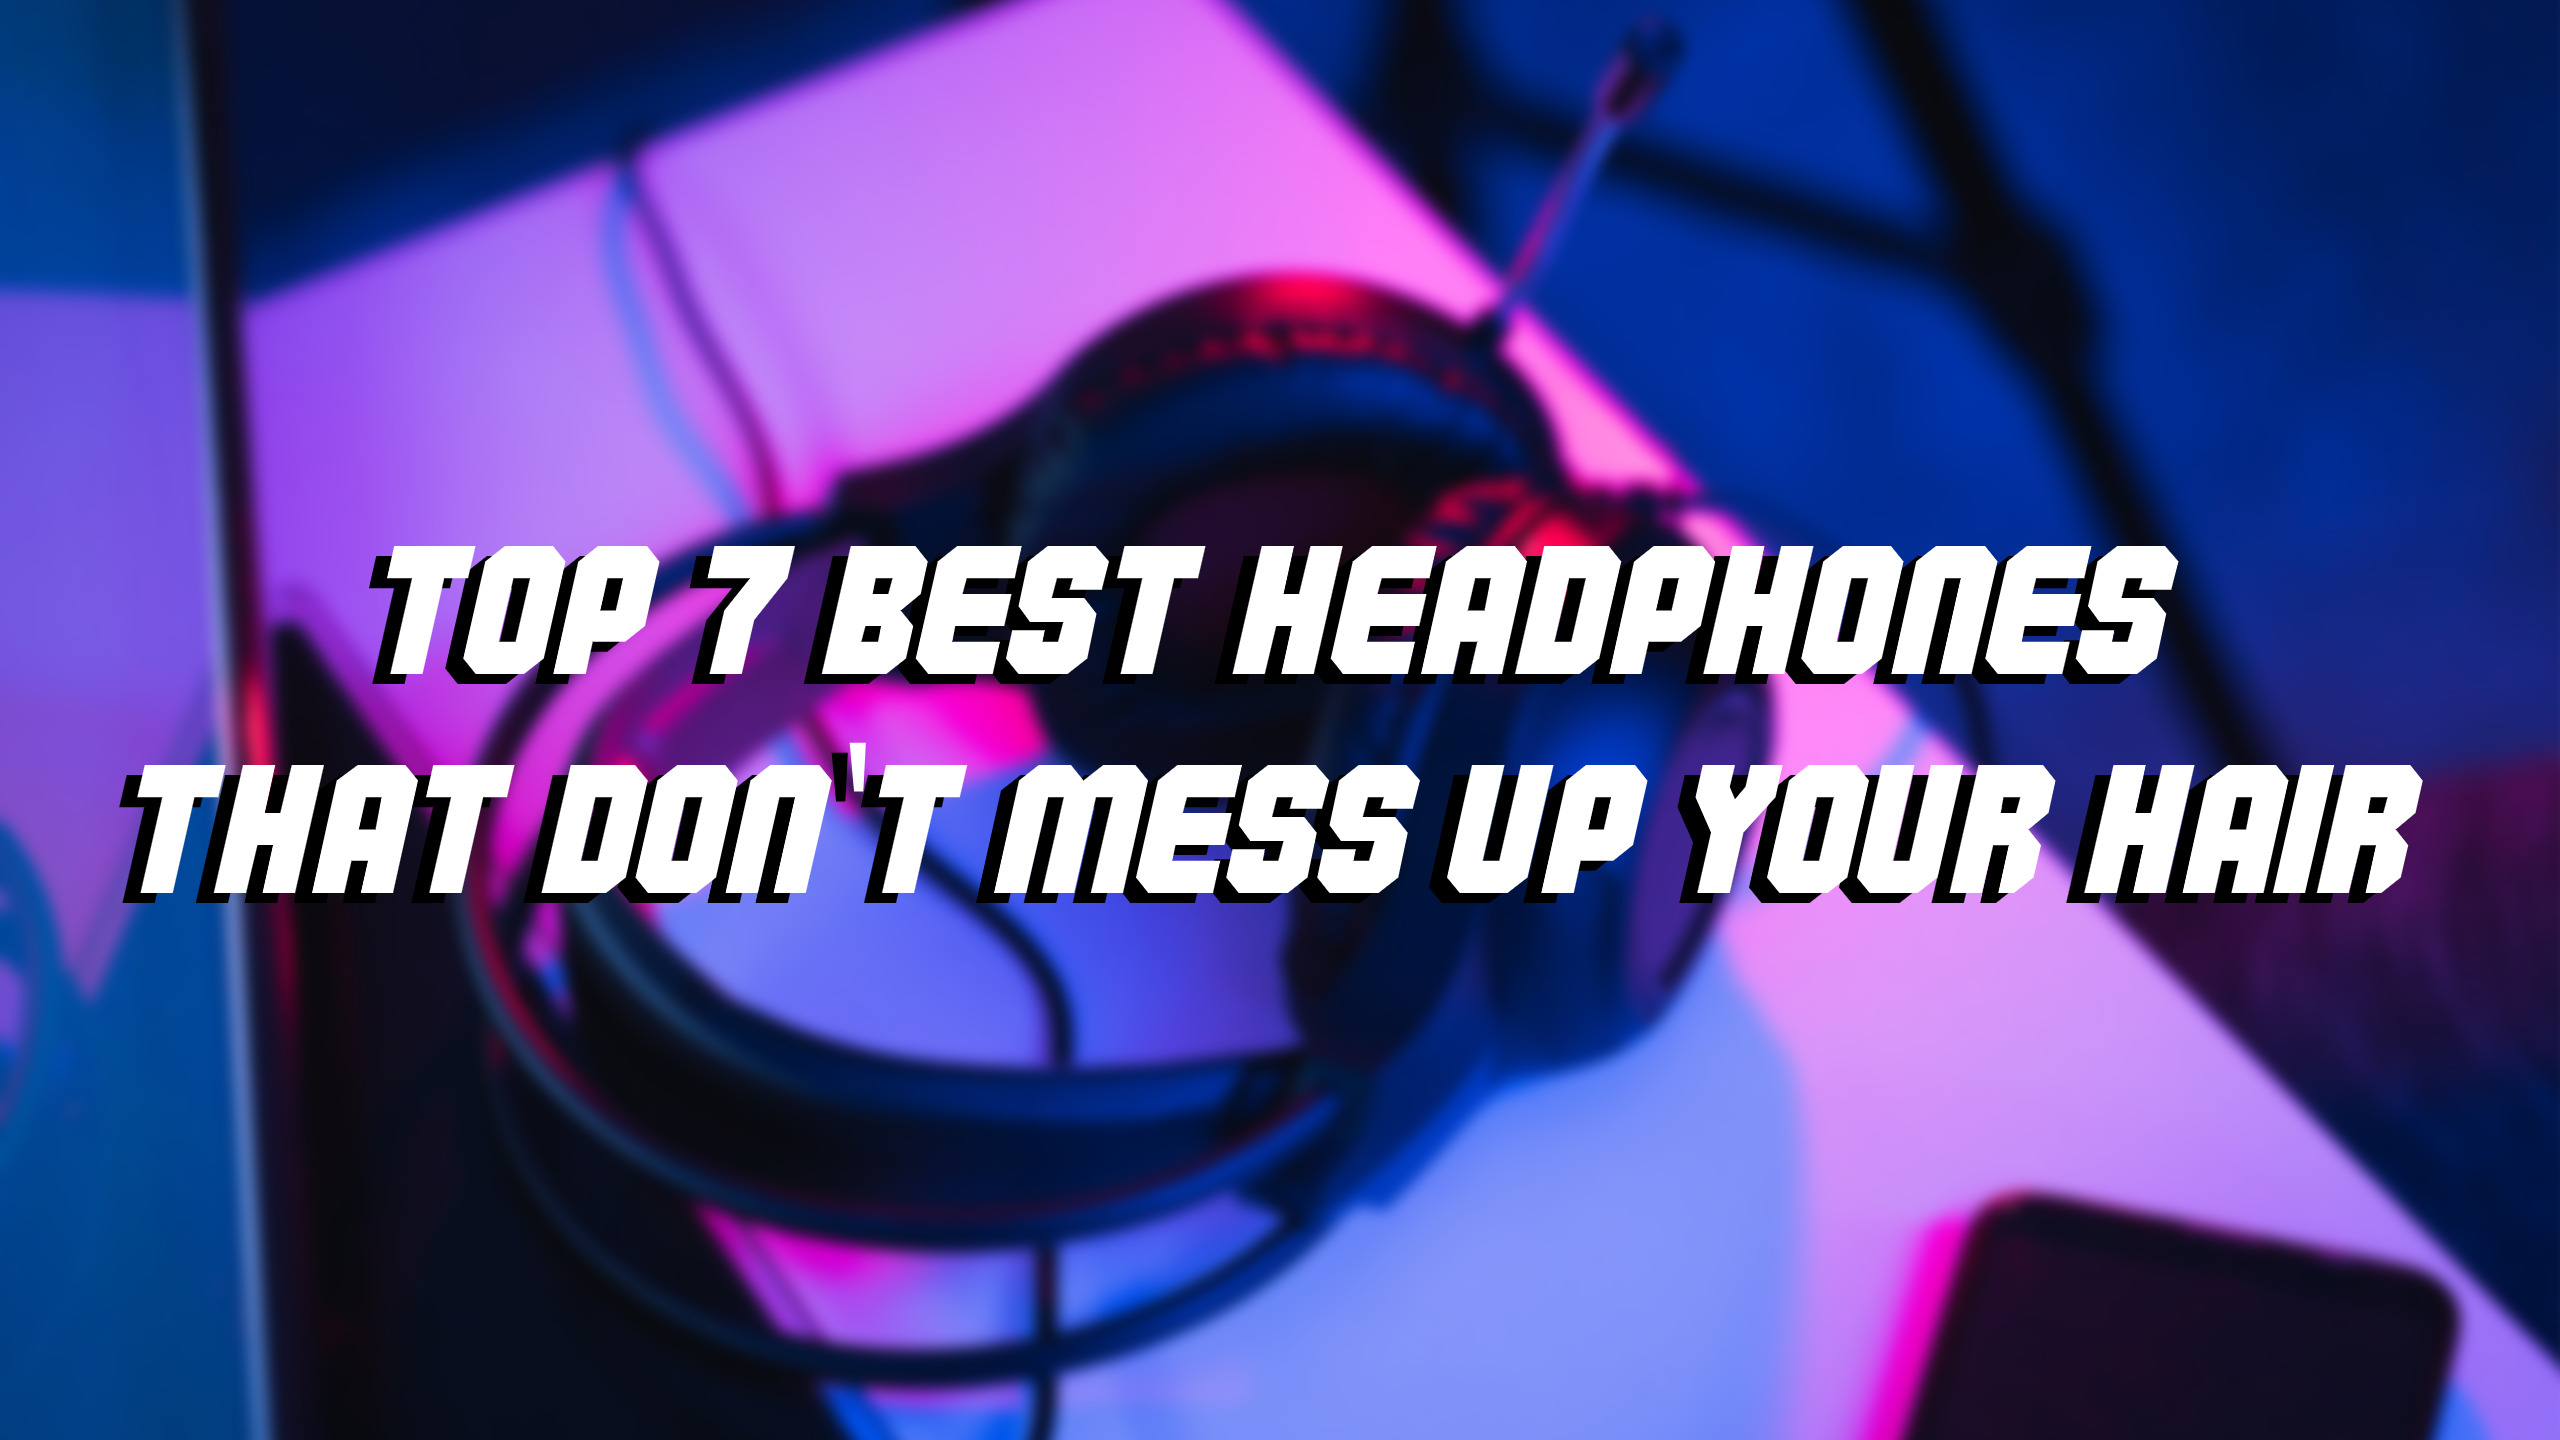 Top 7 Best Headphones That Don't Mess Up Your Hair